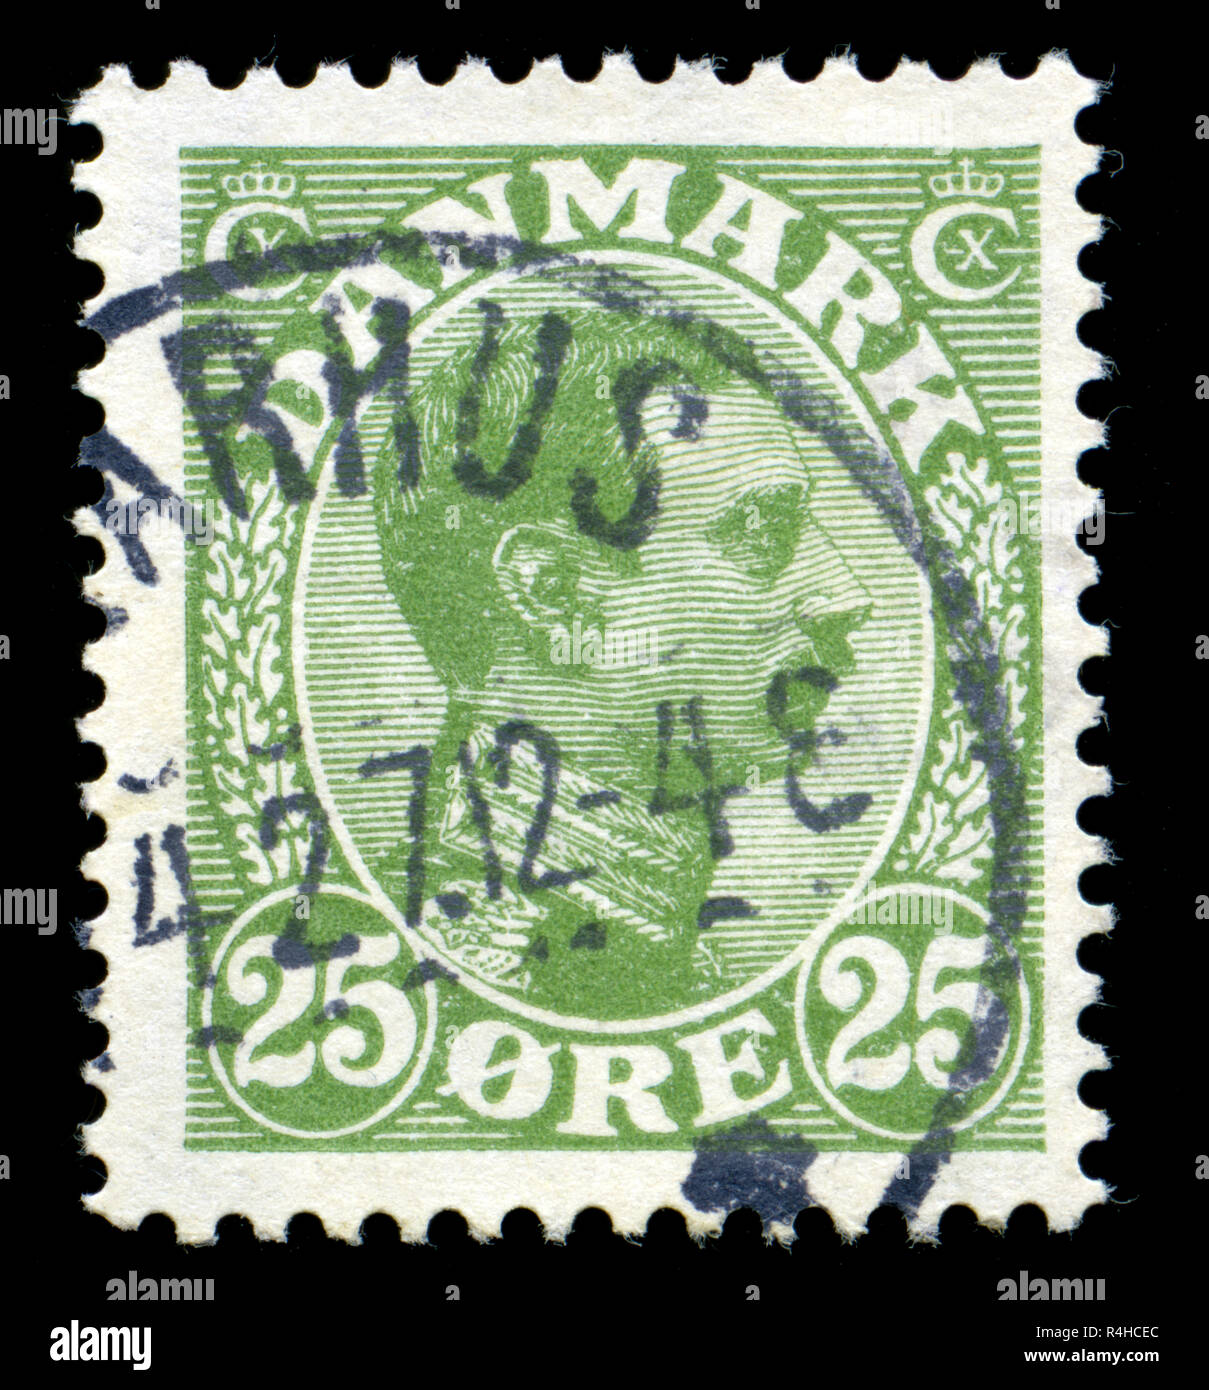 Postmarked stamp from Denmark in the King Christian X series issued in 1925 Stock Photo